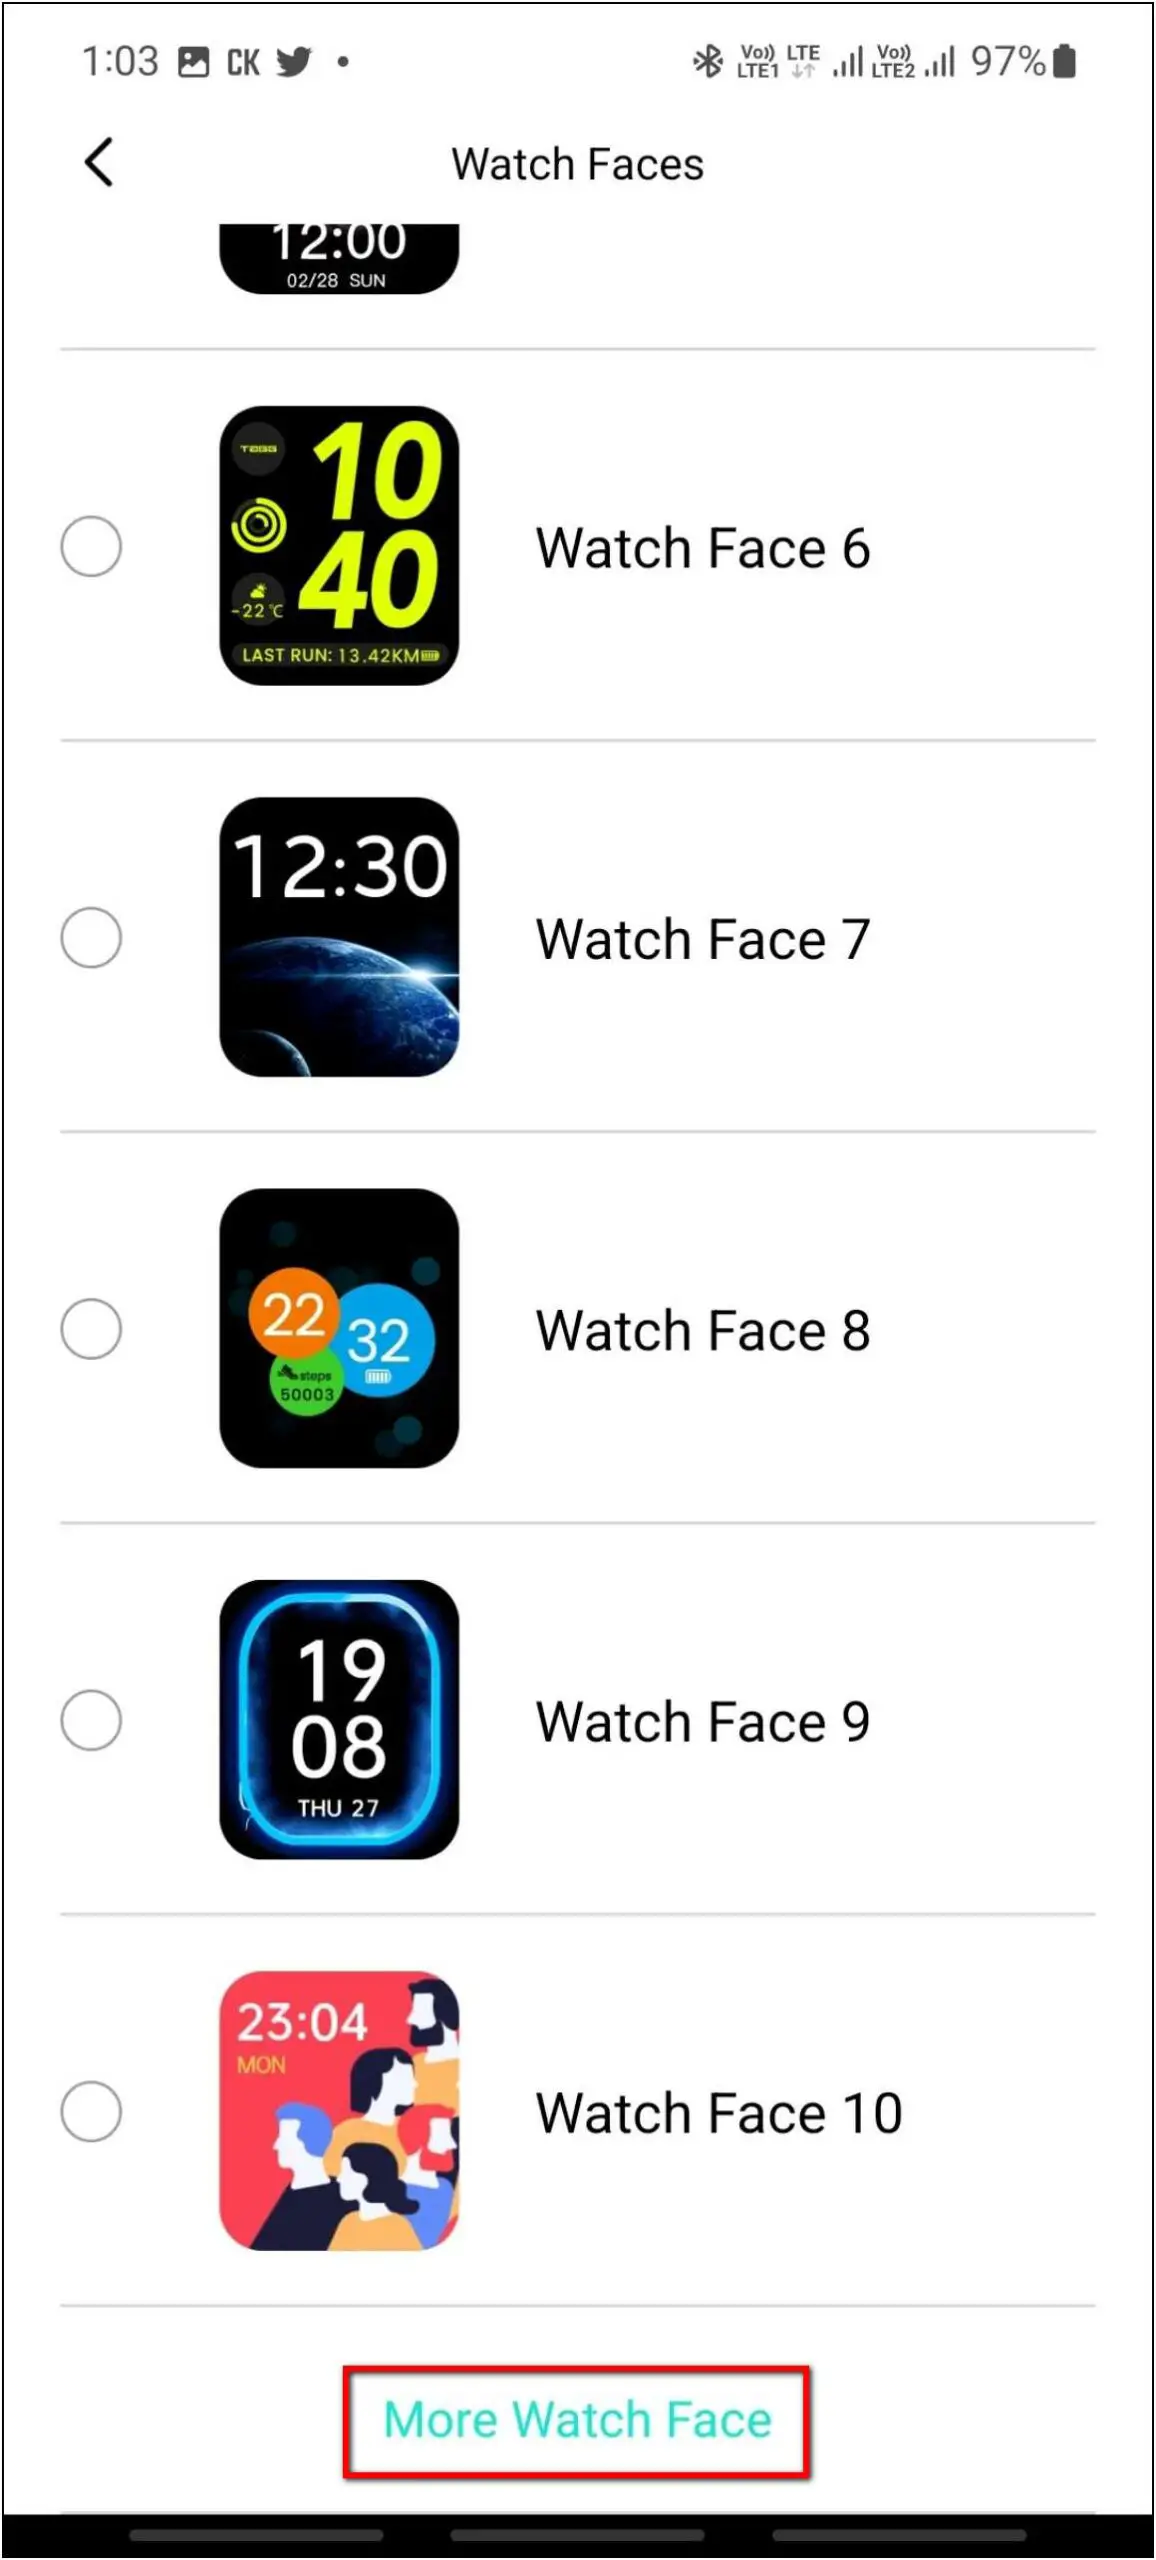 Download Watch Faces on Tagg Verve Engage